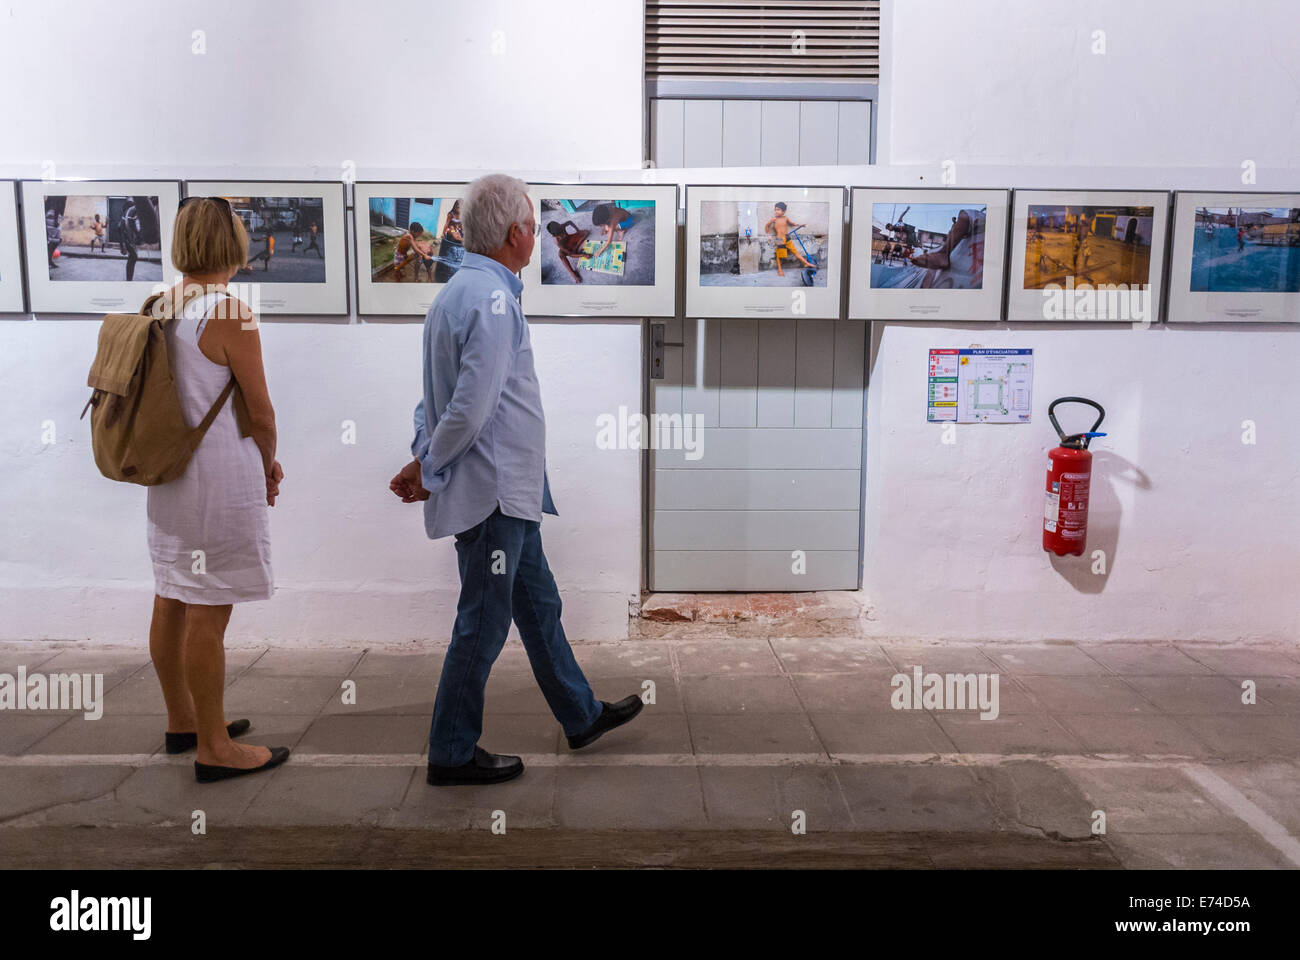 Perpignan, France, Tourists Visiting in 'Visa Pour l'Image' Photojournalism Festival Photography Gallery Exhibition Stock Photo